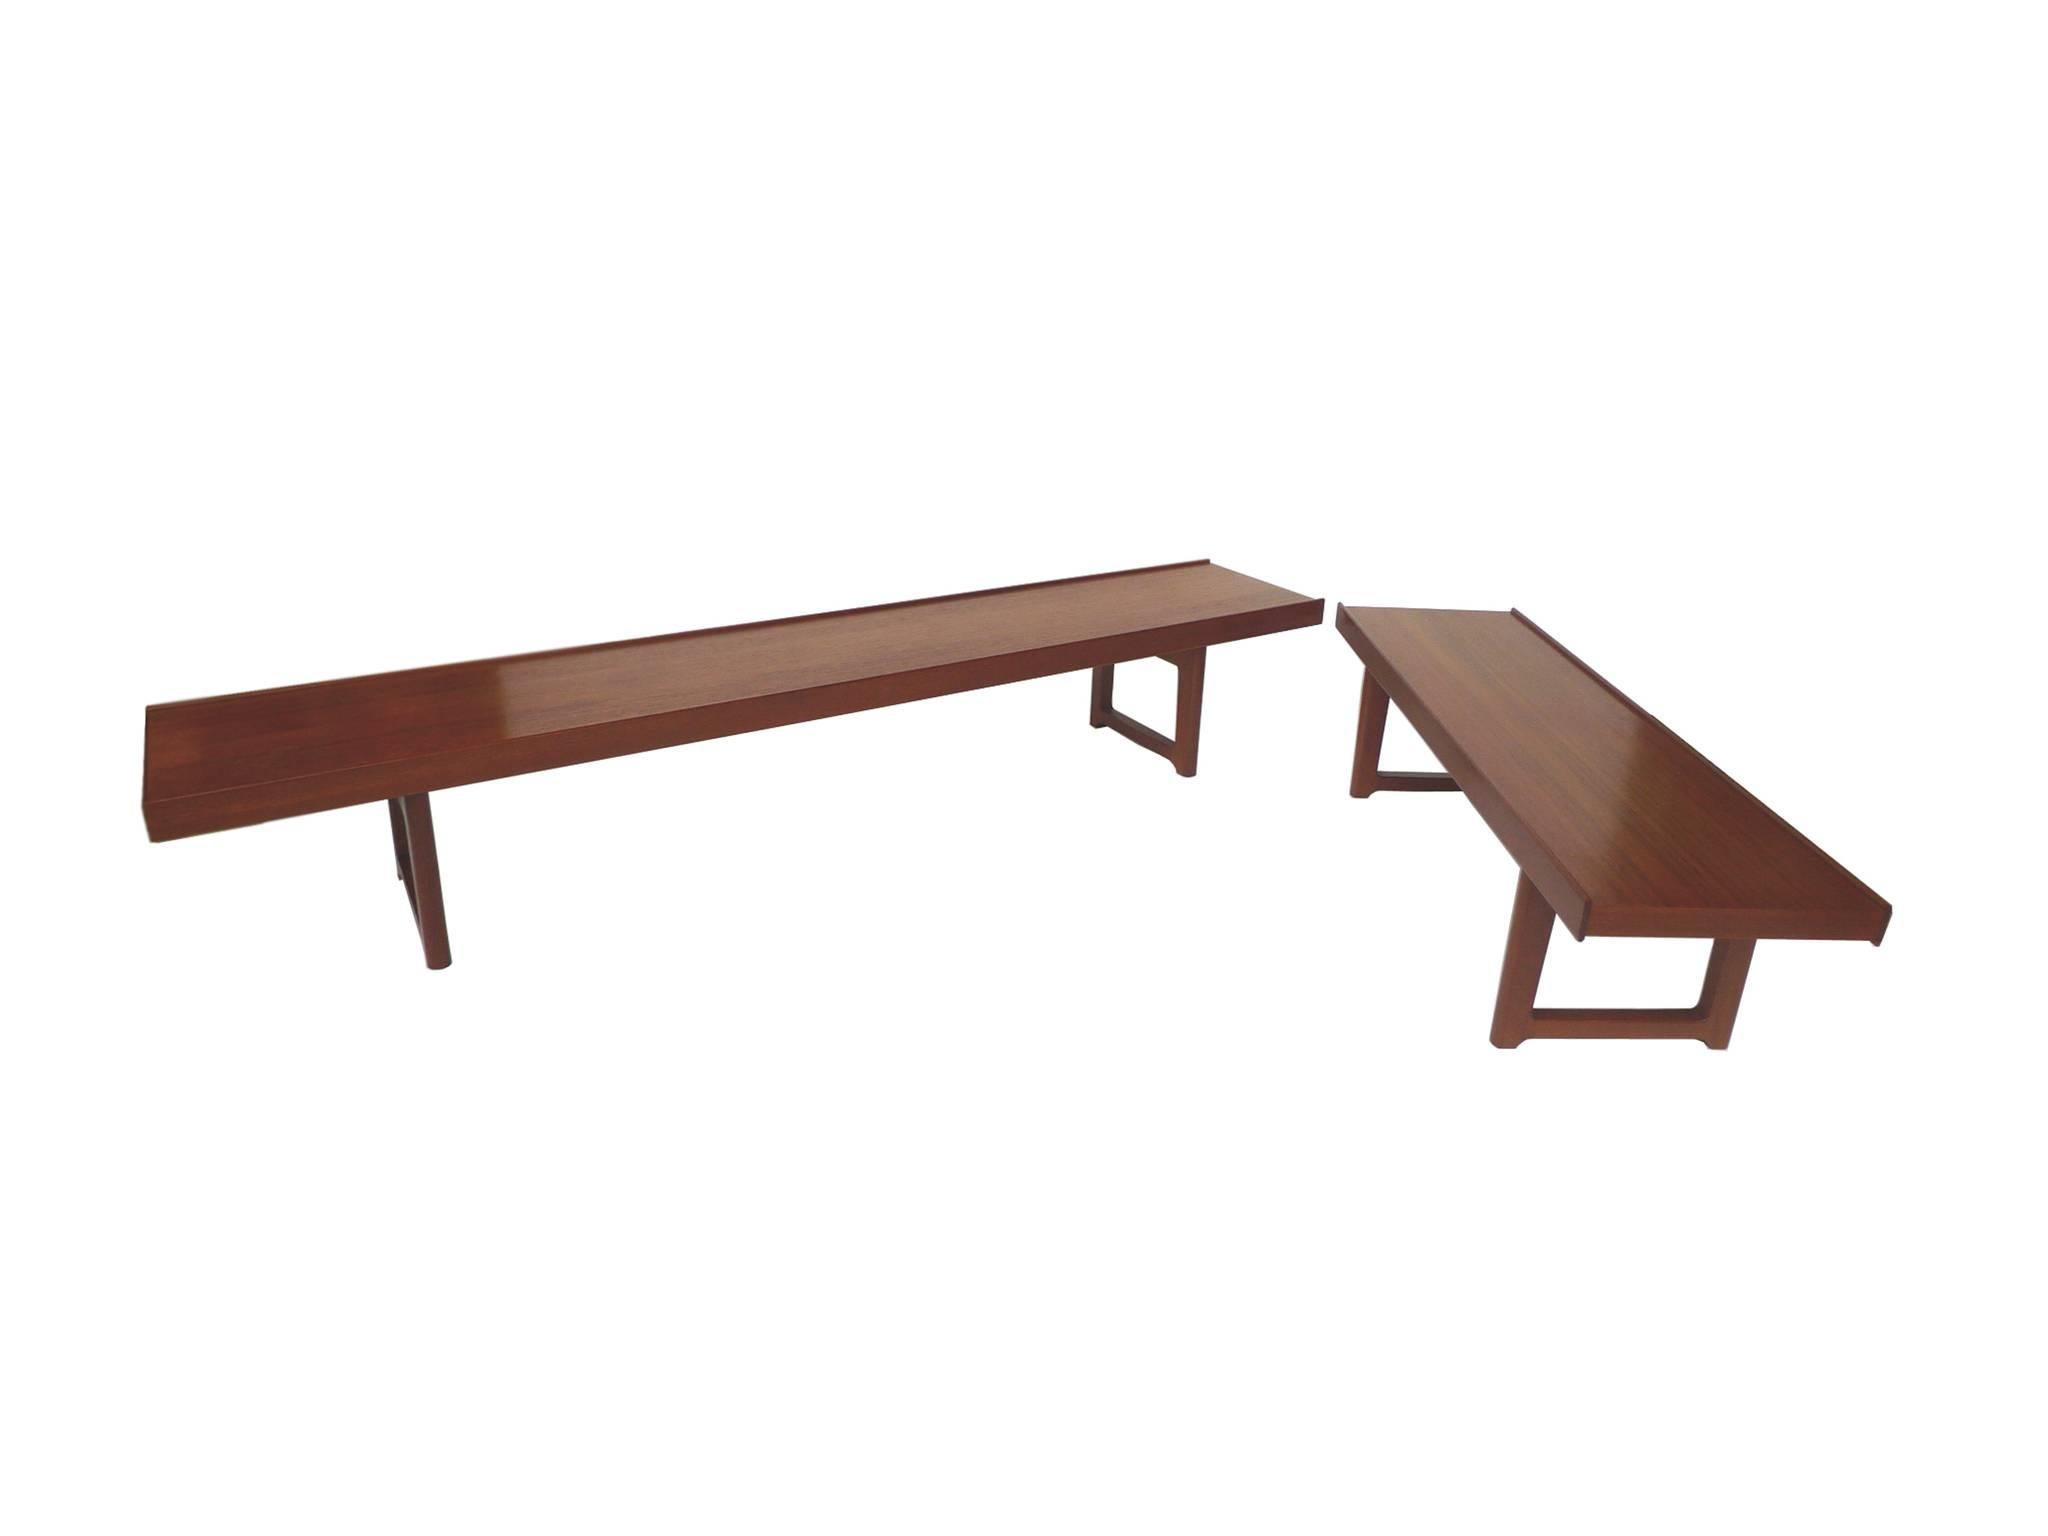 This versatile set of solid teak bench-tables was designed by Torbjørn Afdal for Bruksbo Norway in the 1960s. It consists of a long table-bench and a smaller one, with two original black leather pillows. The table-benches are designed with smooth